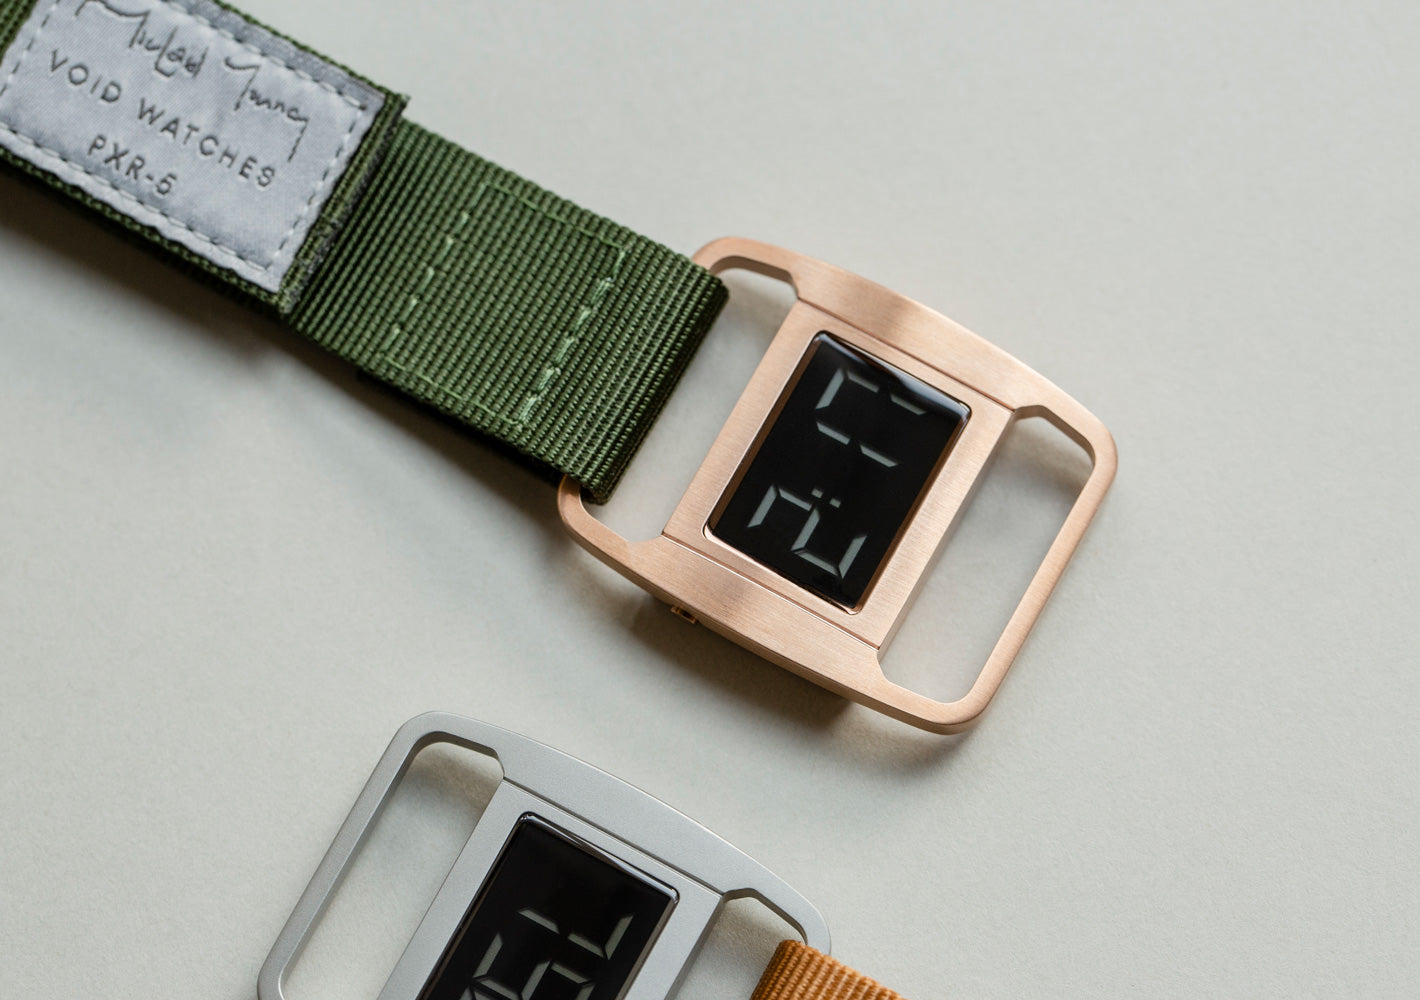 The PXR5 from VOID Watches, designed by British Designer Michael Young